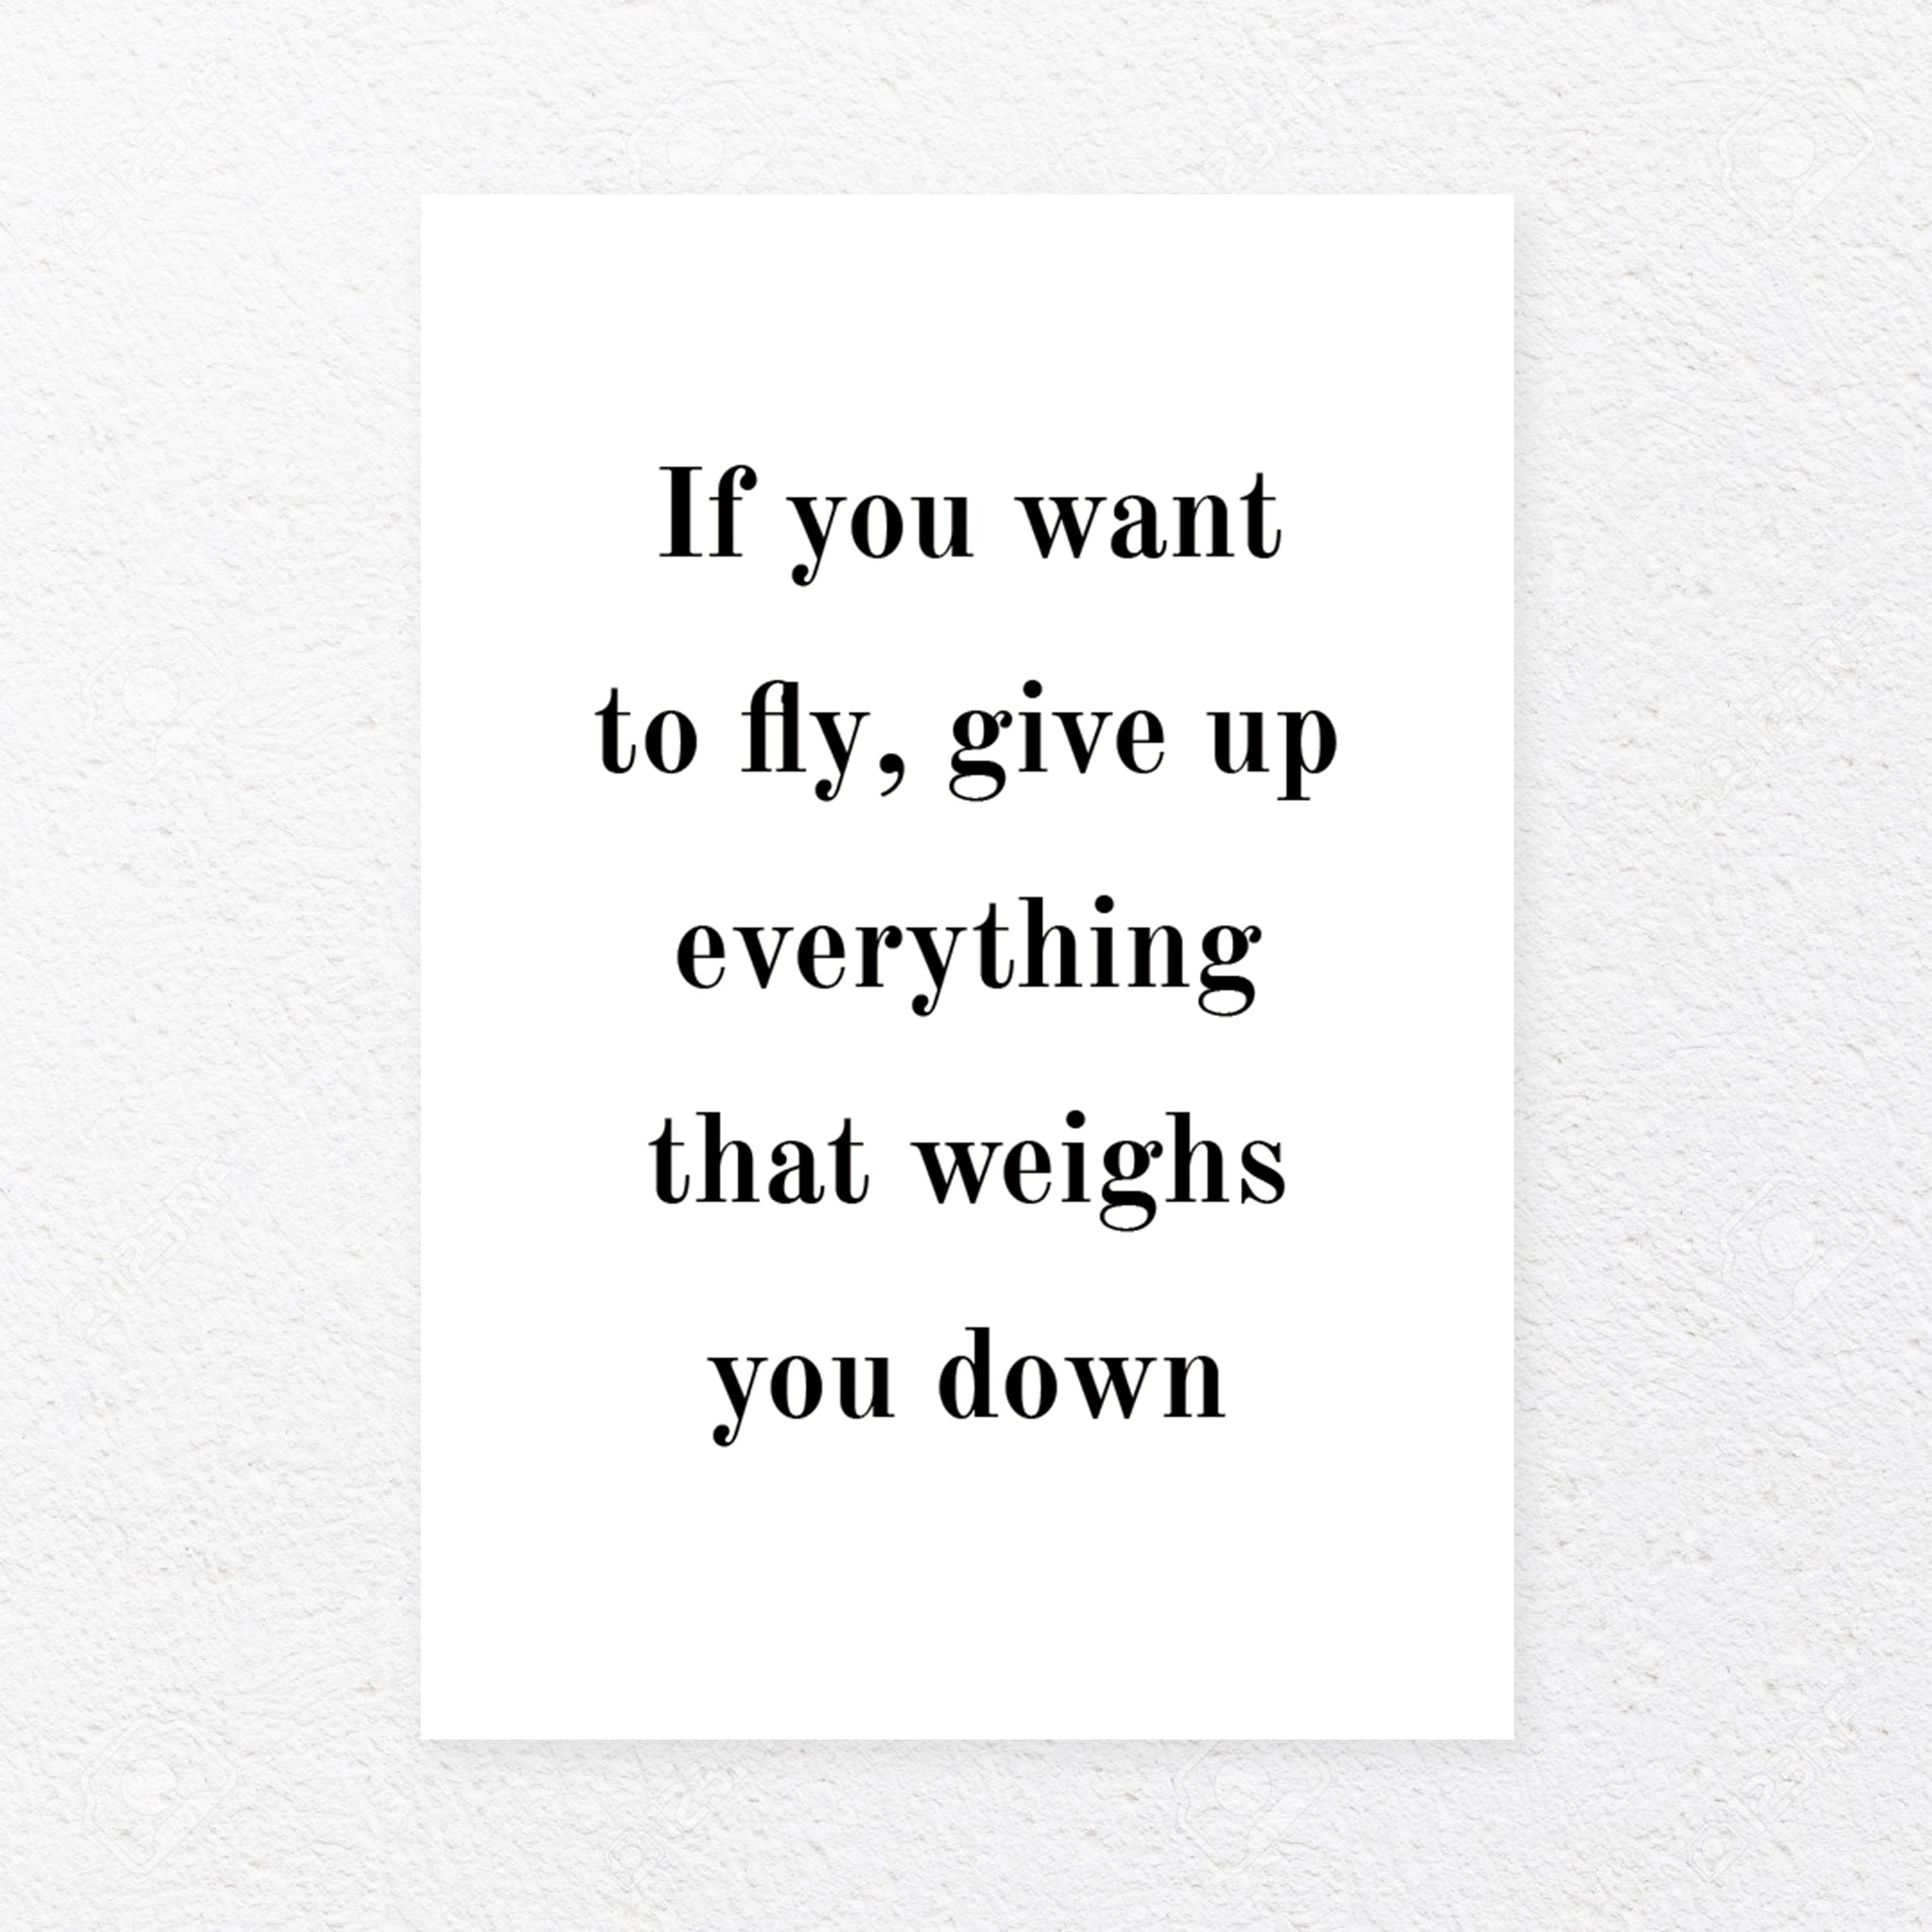 If you want to fly, give up everything that weighs you down, , Heimekoseleg